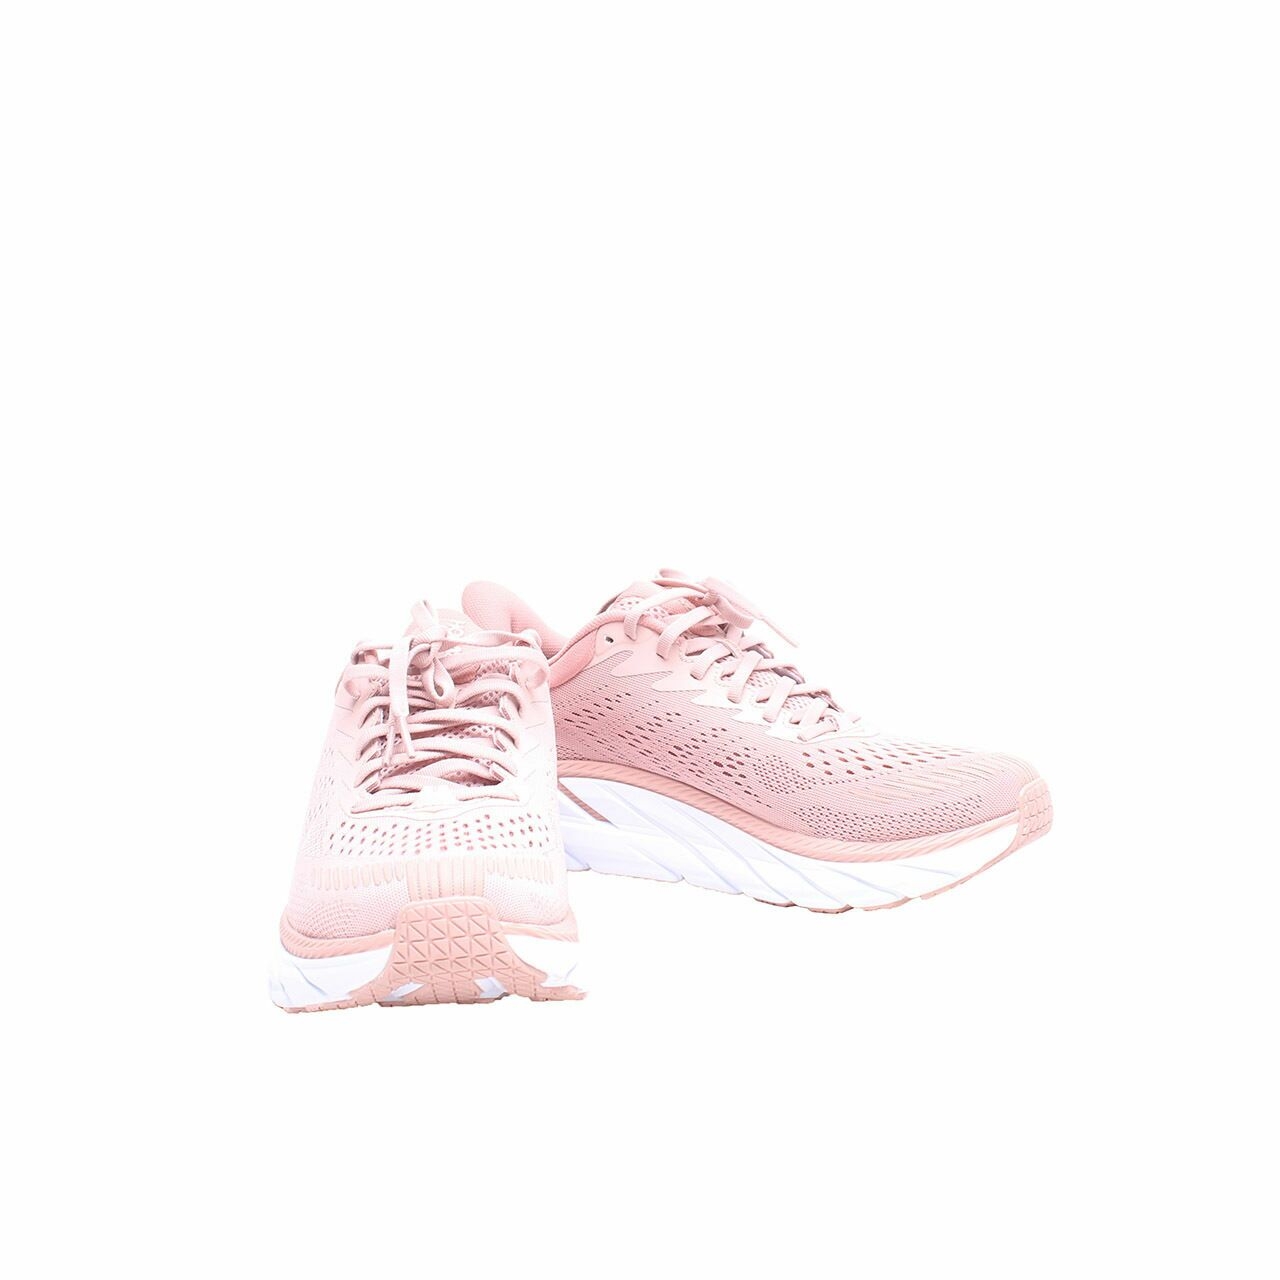 Hoka One one Pink Rose Clifton 7 Women's Running Shoes Sneakers